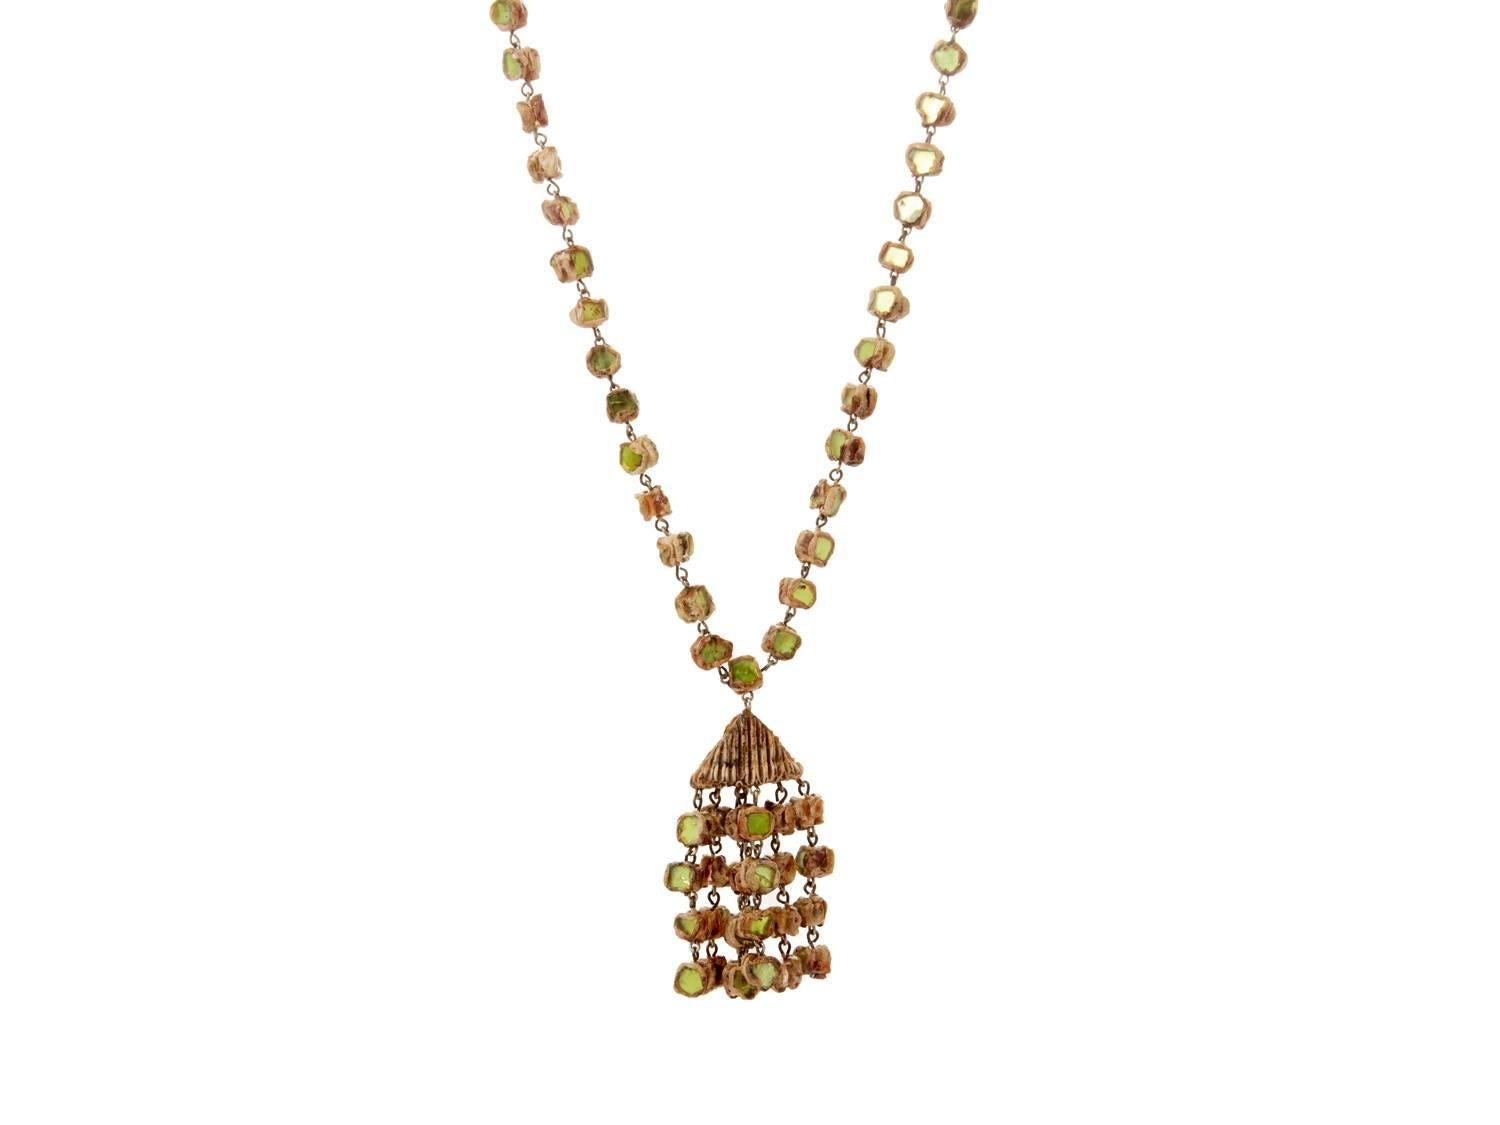 Line Vautrin, Untitled Necklace with 7 strand pendant, talosel resin, mirror fragment, unique.

Line Vautrin (1913-1997) French artist, jewellery and designer worked in a range of experimental mediums including resin, glass and bronze taking the